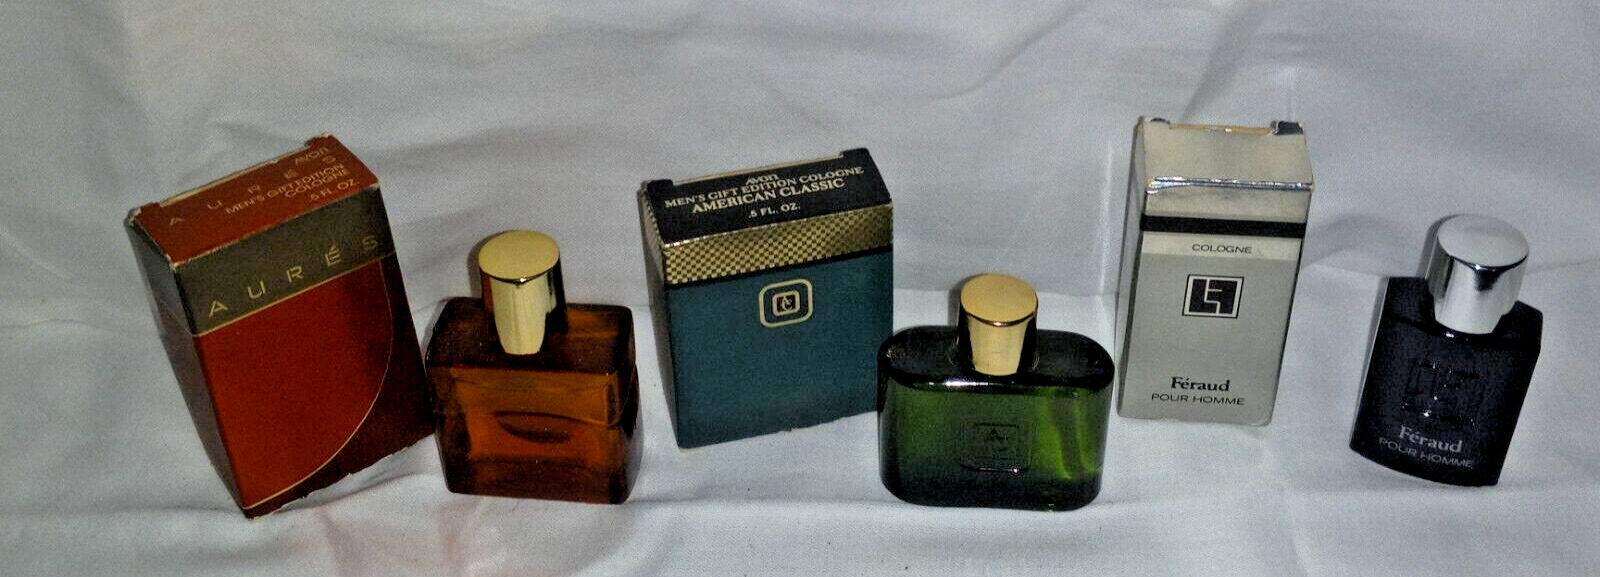 VINTAGE 3 AVON COLOGNES 1980\'s NEW IN ORIGINAL BOXES UNOPENED